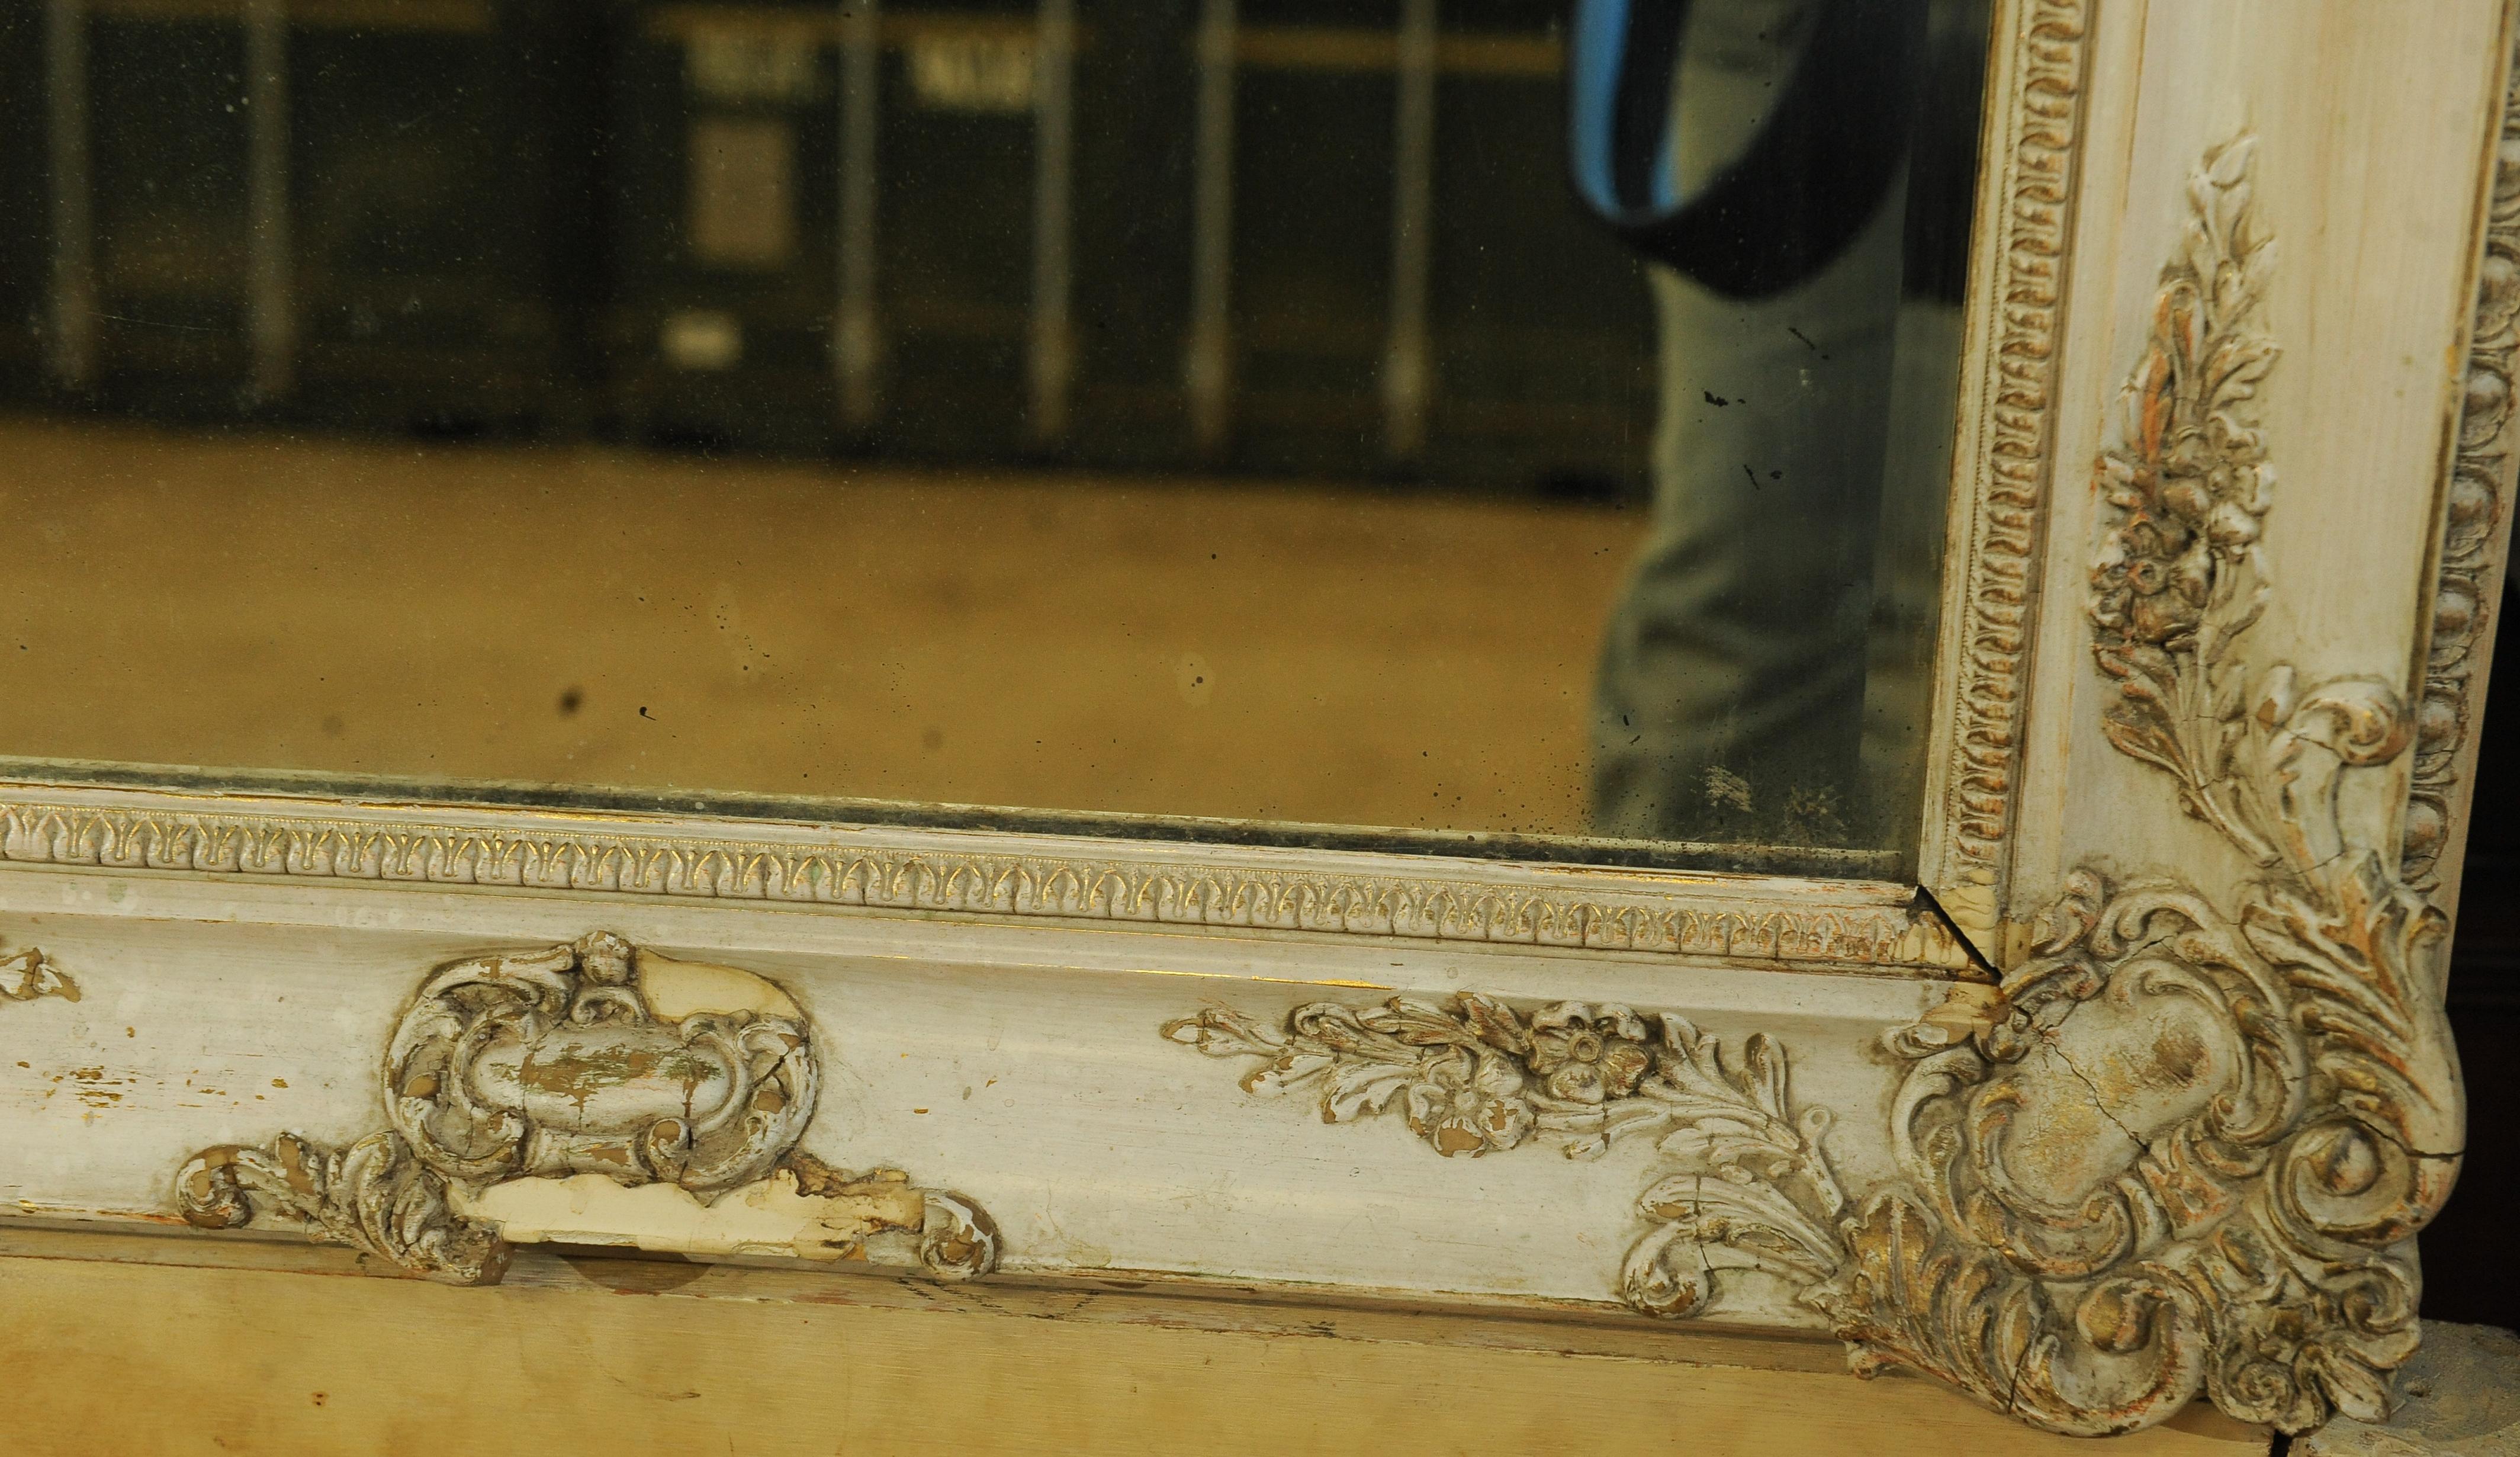 French Provincial 19th Century French Painted & Parcel Gilt Floral Decorative Wall Mirror For Sale